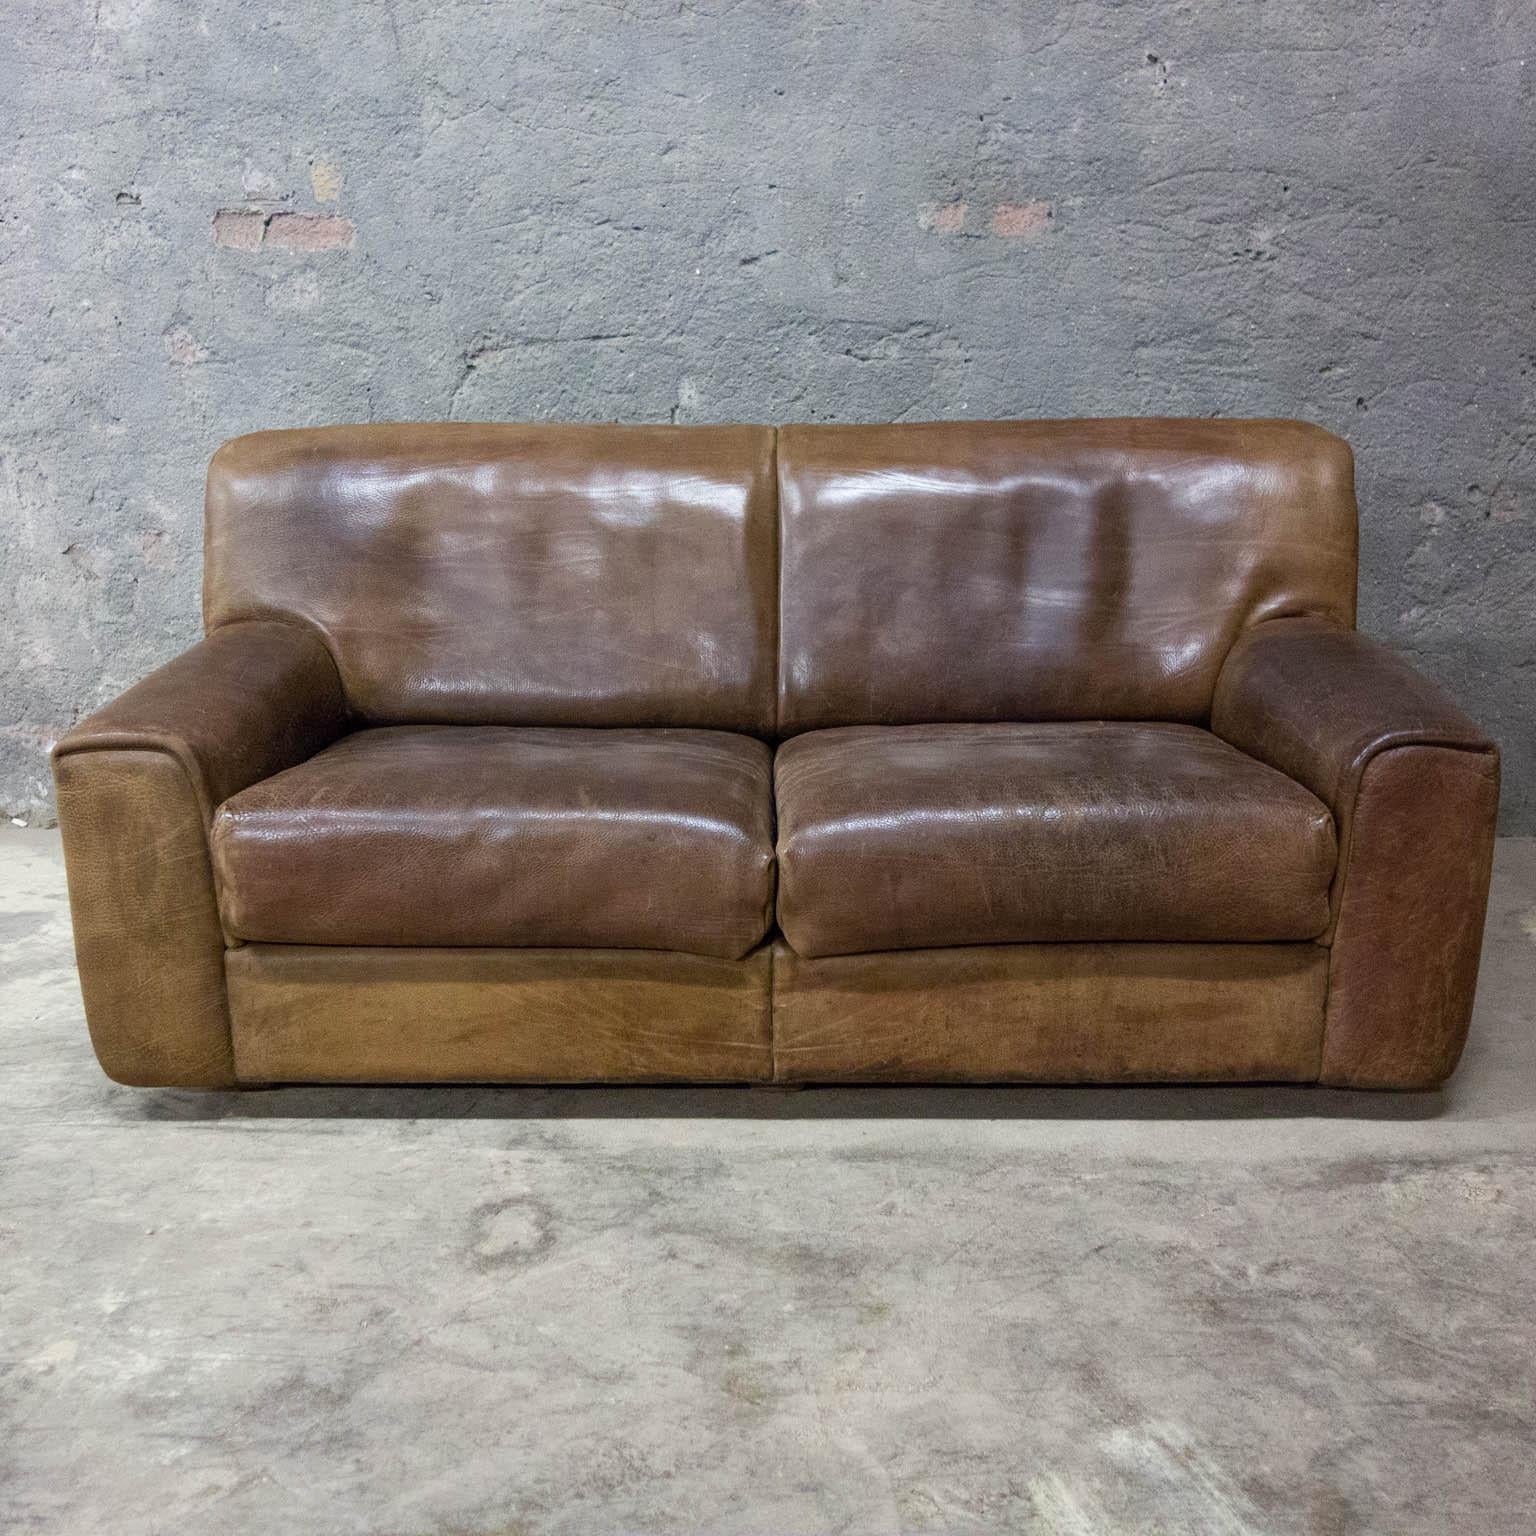 A beautiful midcentury leather sofa from De Sede. The beautifully patinated thick leather of the DS-42 is in good condition and will last for years. Under the removable seat cushions, the De Sede marks can be seen (see photos). Even after almost 50